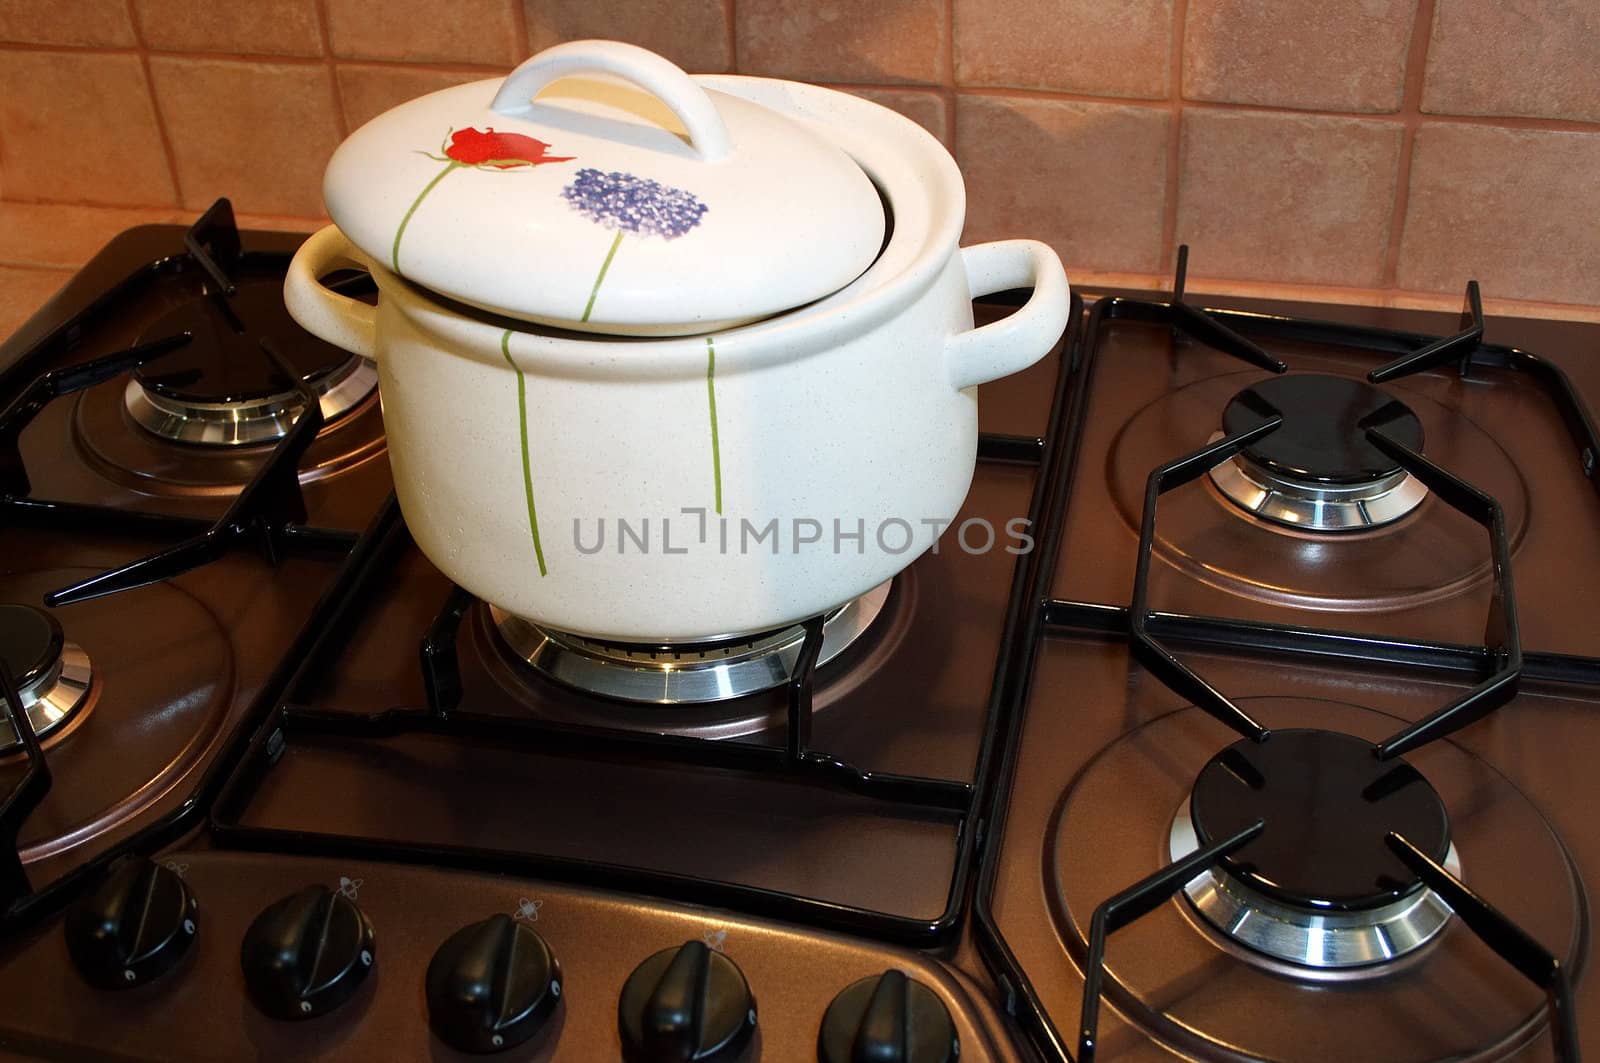 Greater white saucepan on a gas cooker